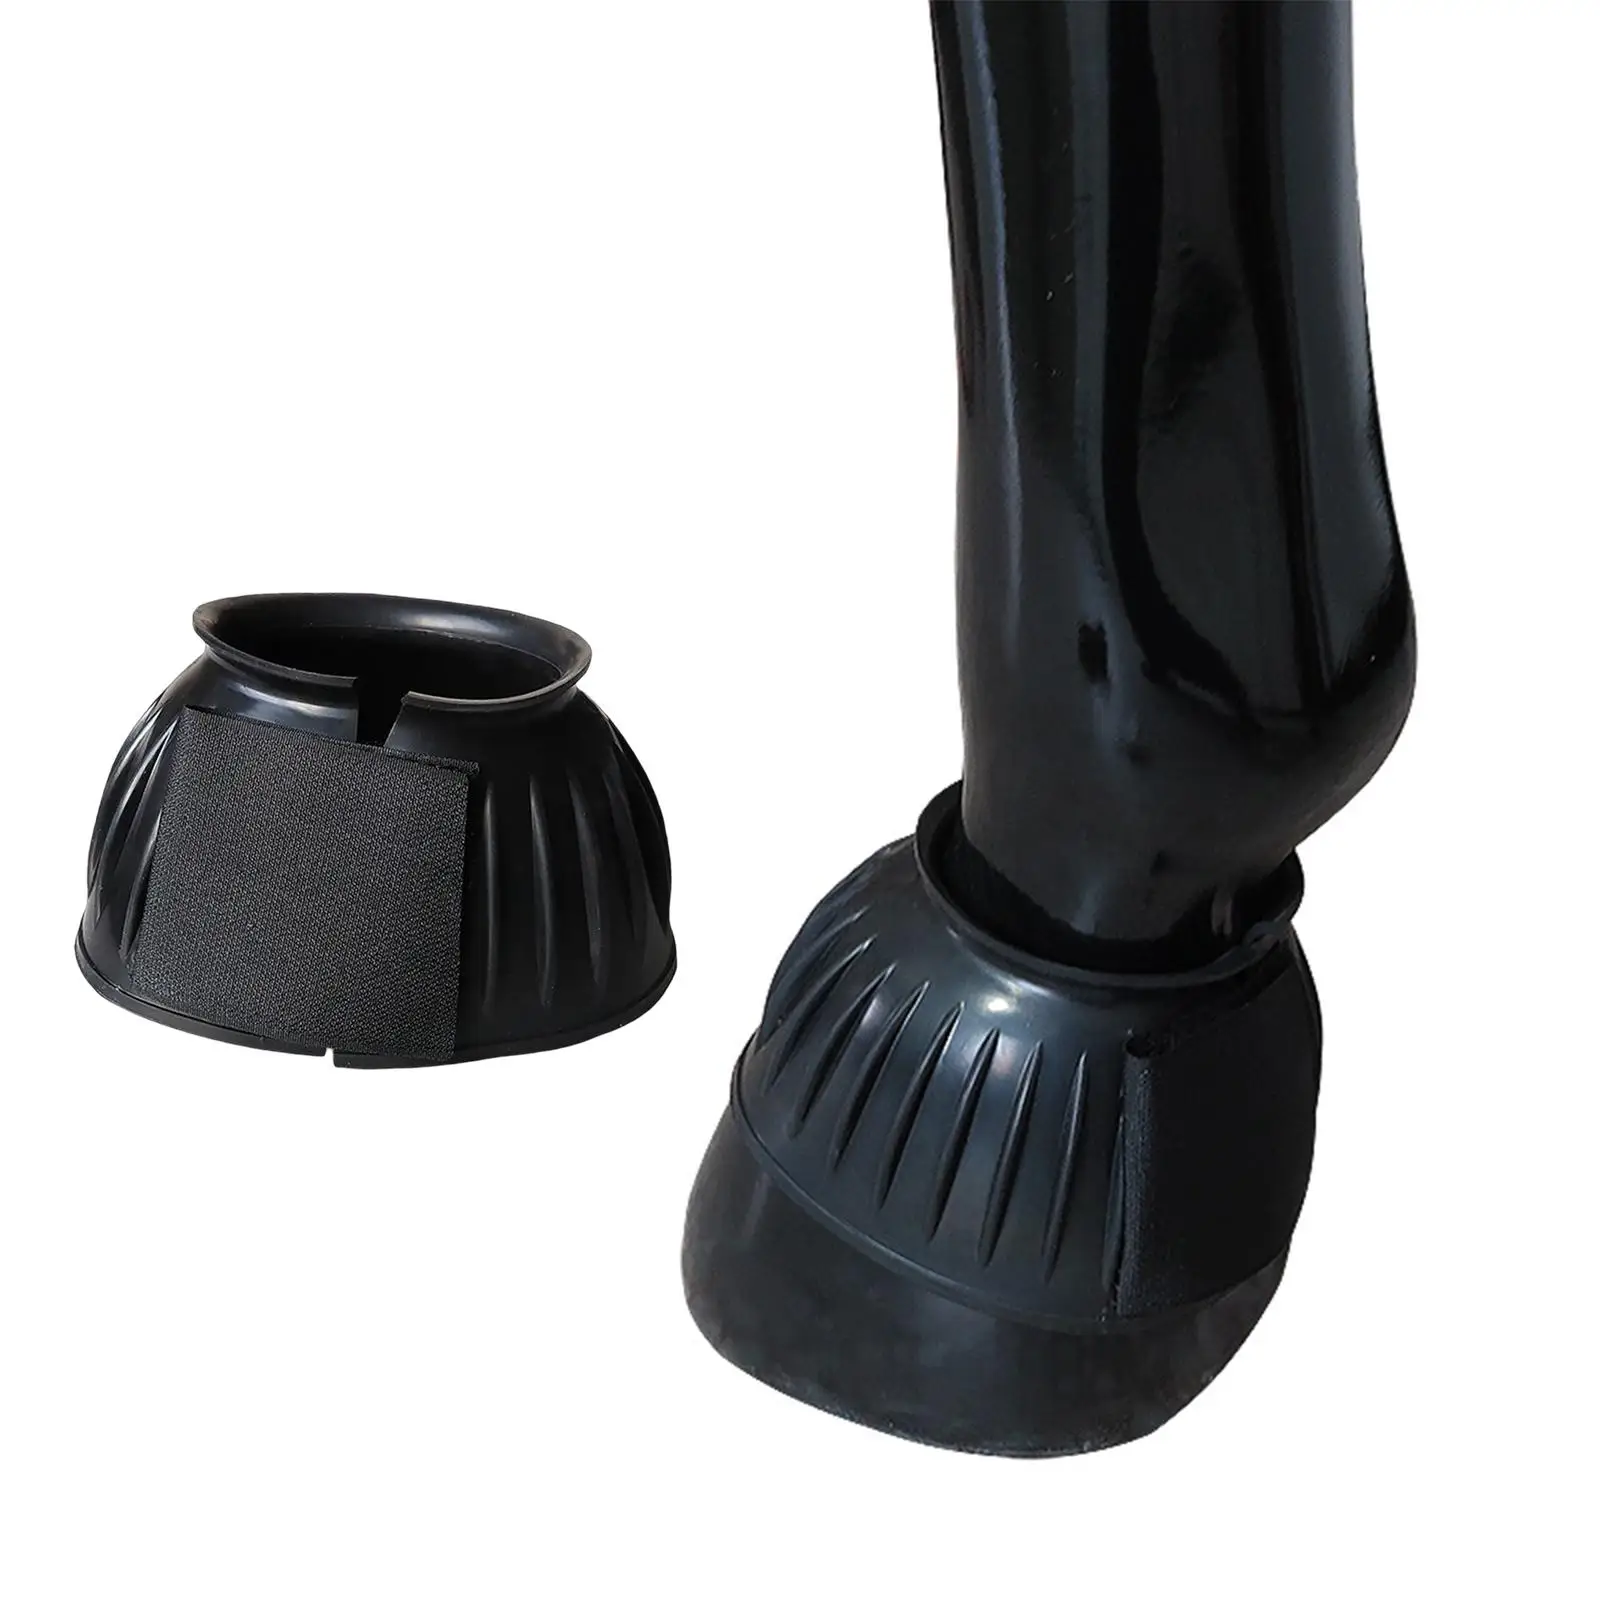 2x Horse Bell Boots Overreach Boot Durable Hoof Protector for Horses Equestrian Equipment